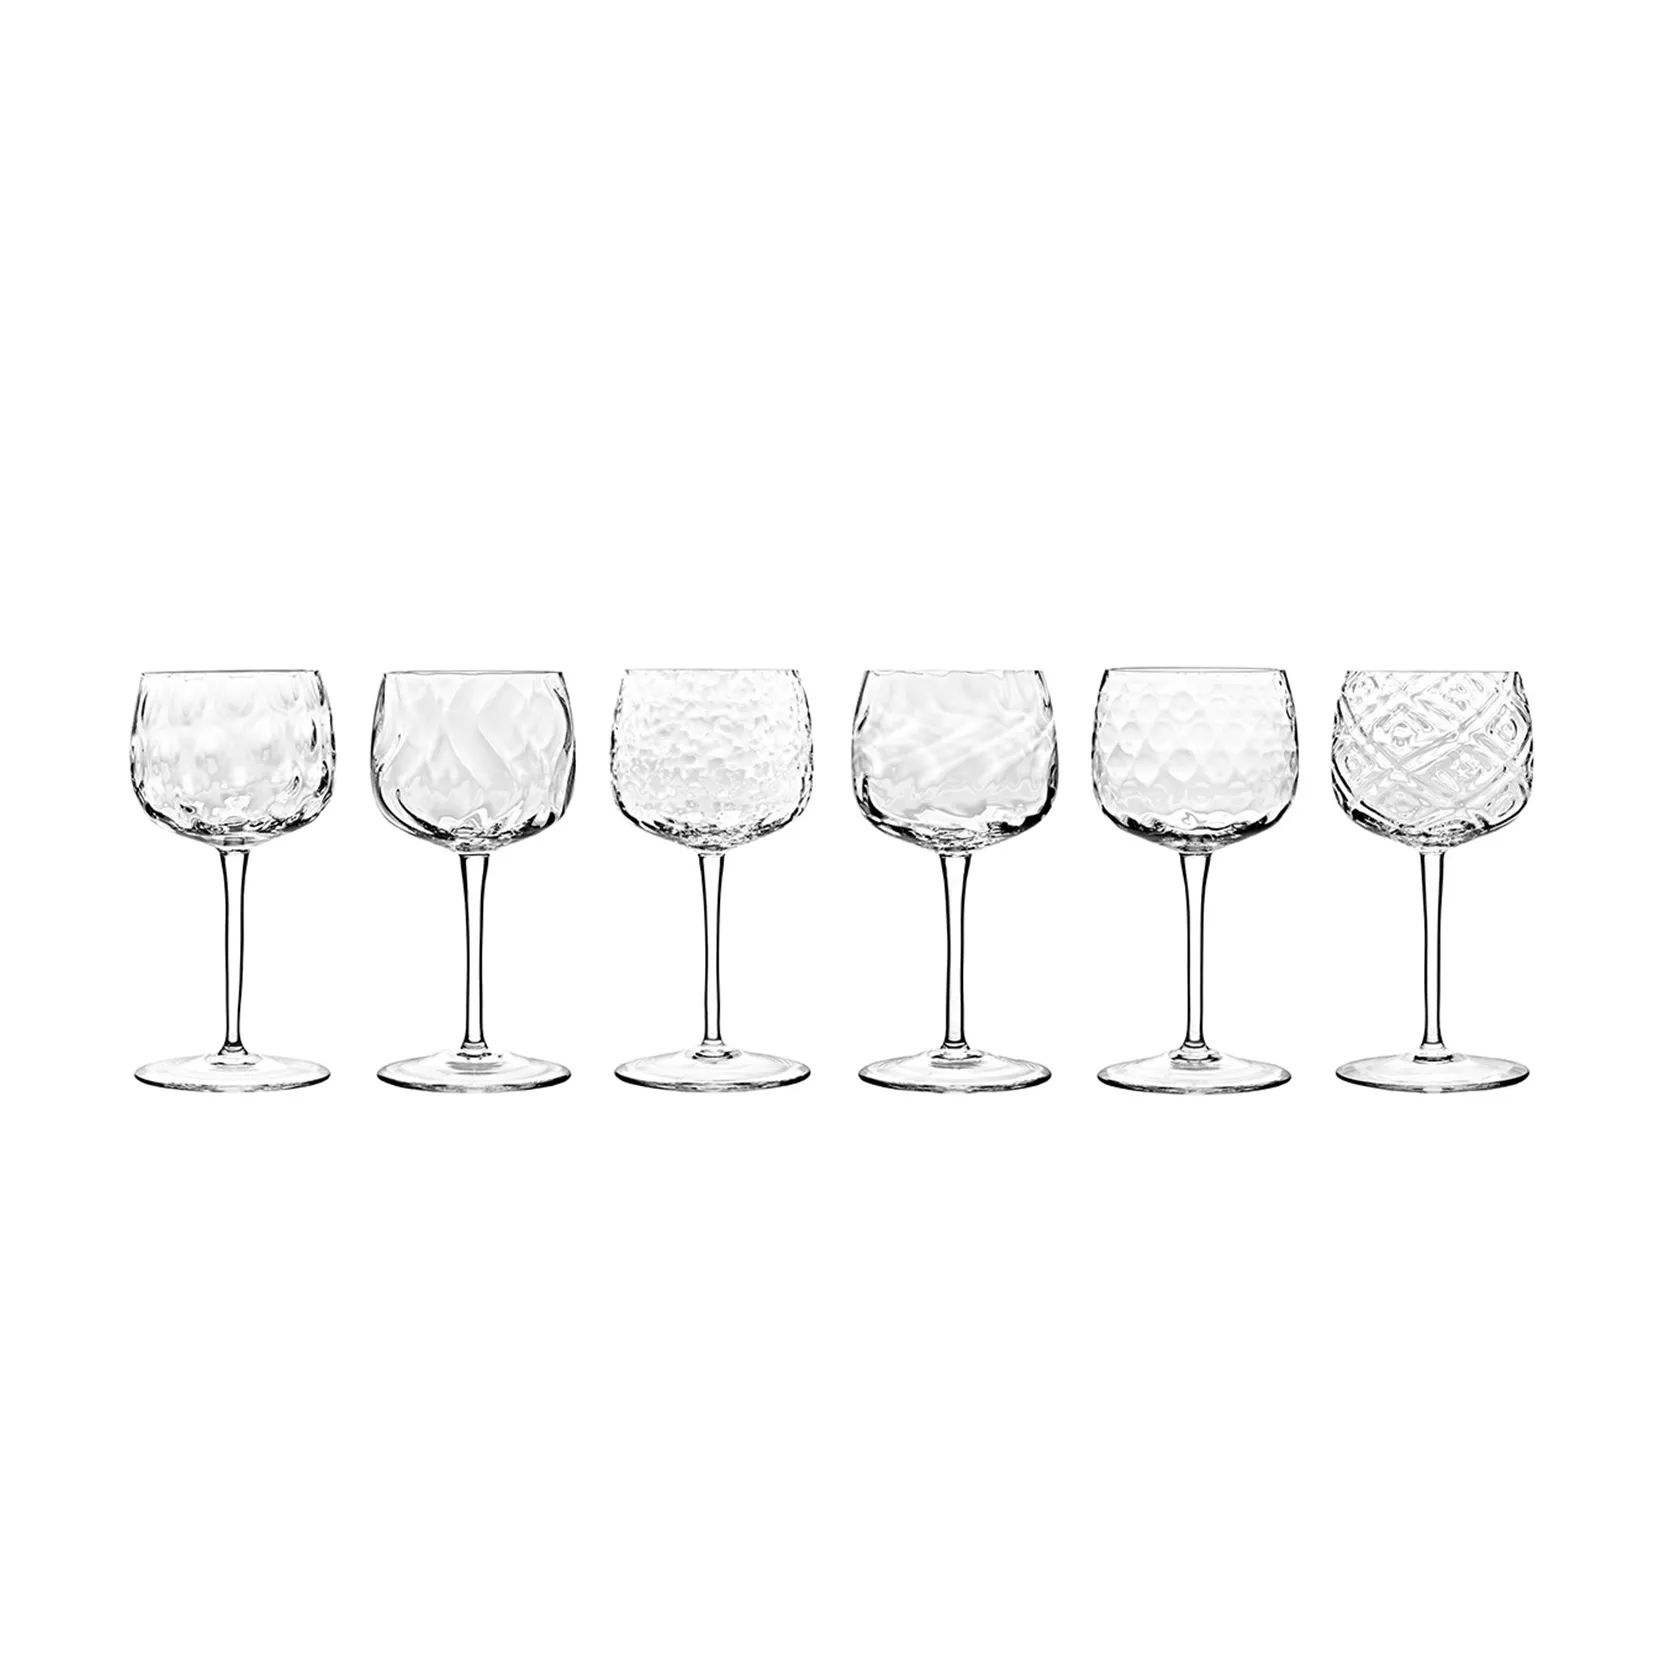 https://www.barthome.shop/84322-thickbox_default/set-of-6-goblets-covo-bei.jpg